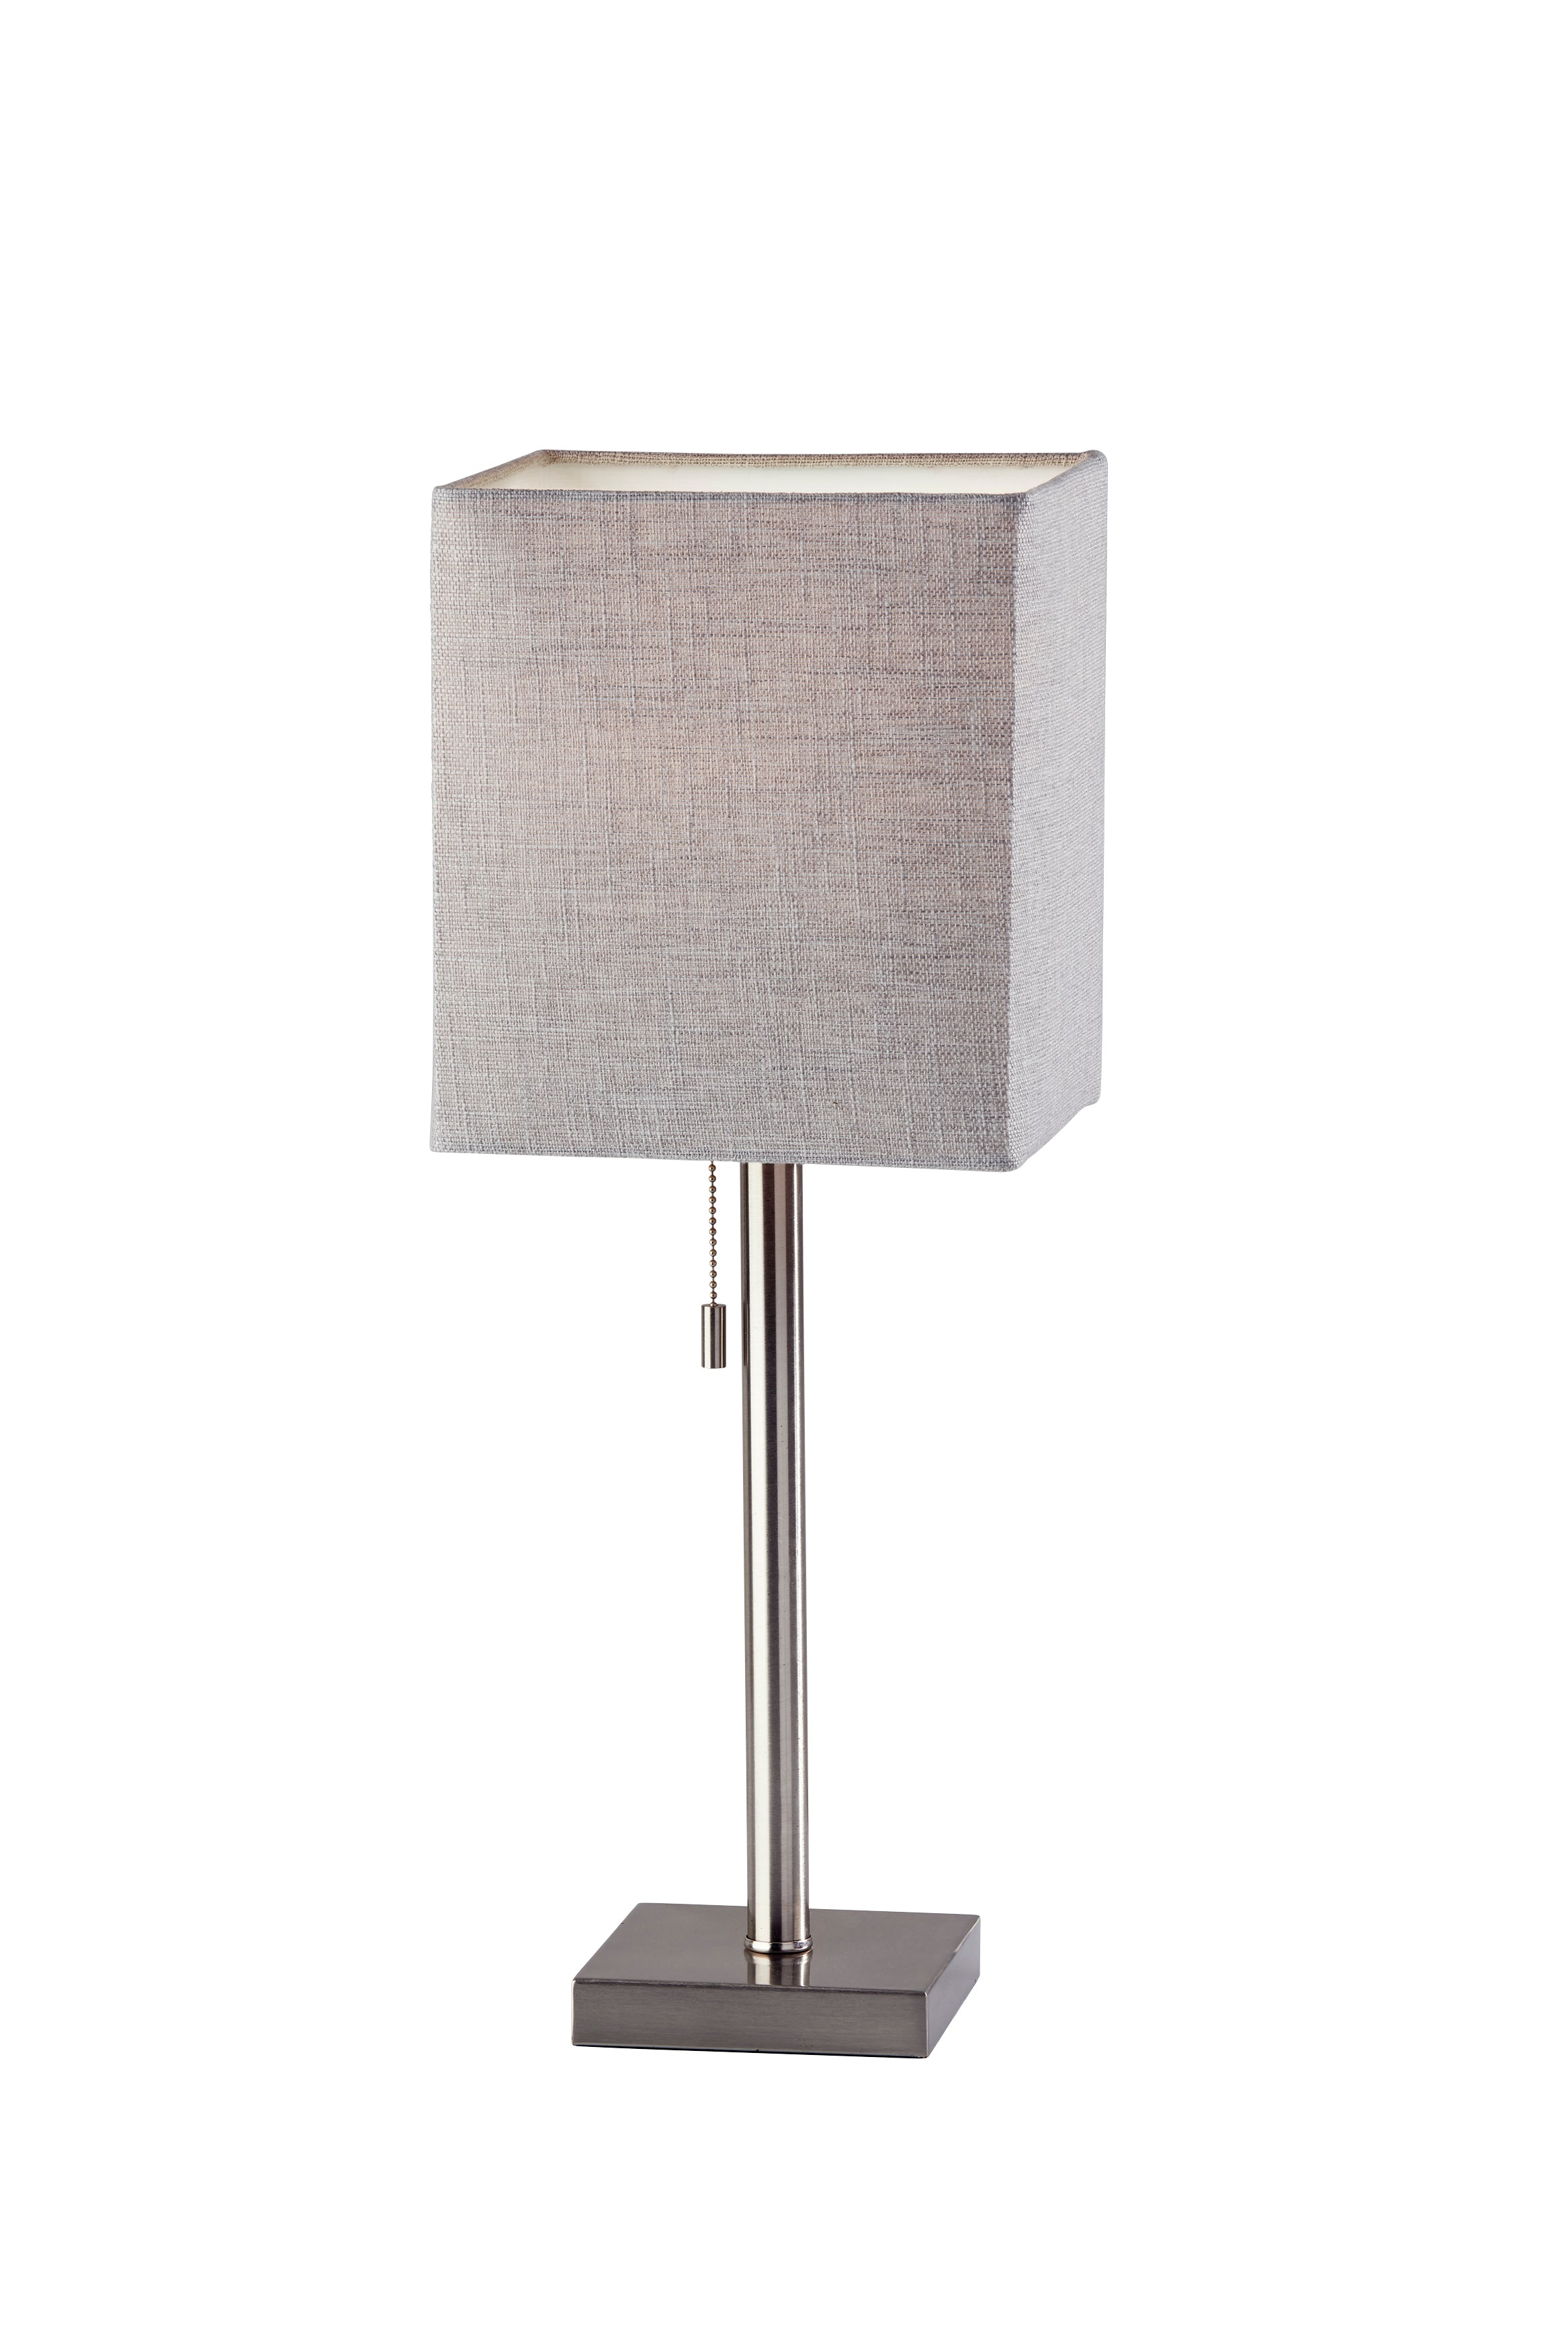 ESTELLE Table lamp Stainless steel - 1566-22 | ADESSO